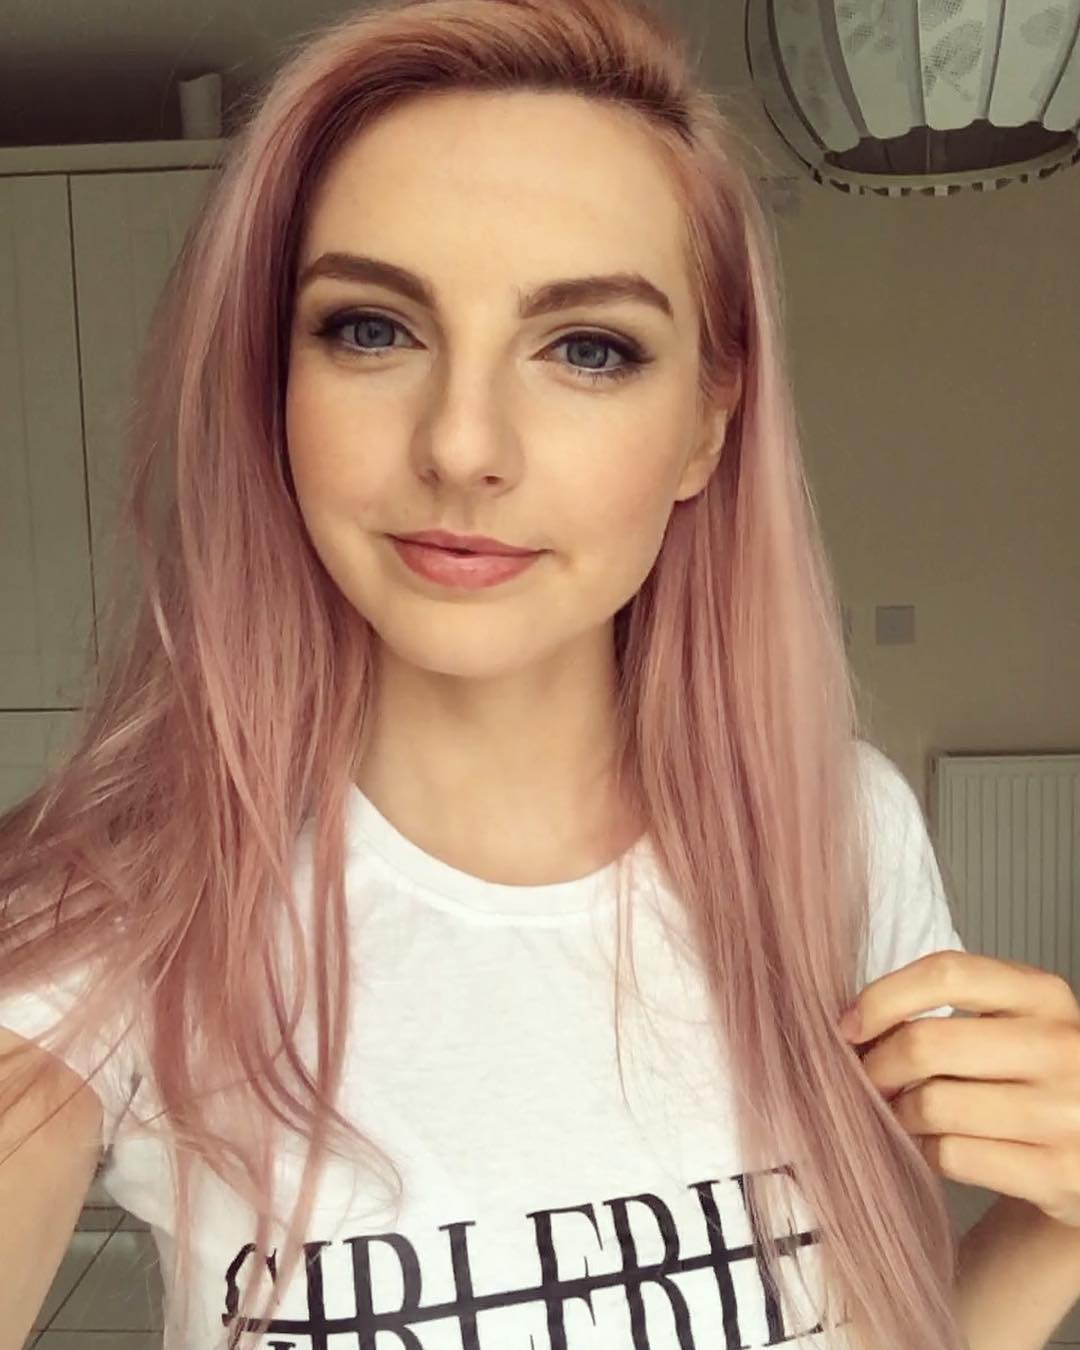 51 Sexy LDShadowLady Boobs Pictures That Will Fill Your Heart With Triumphant Satisfaction 43